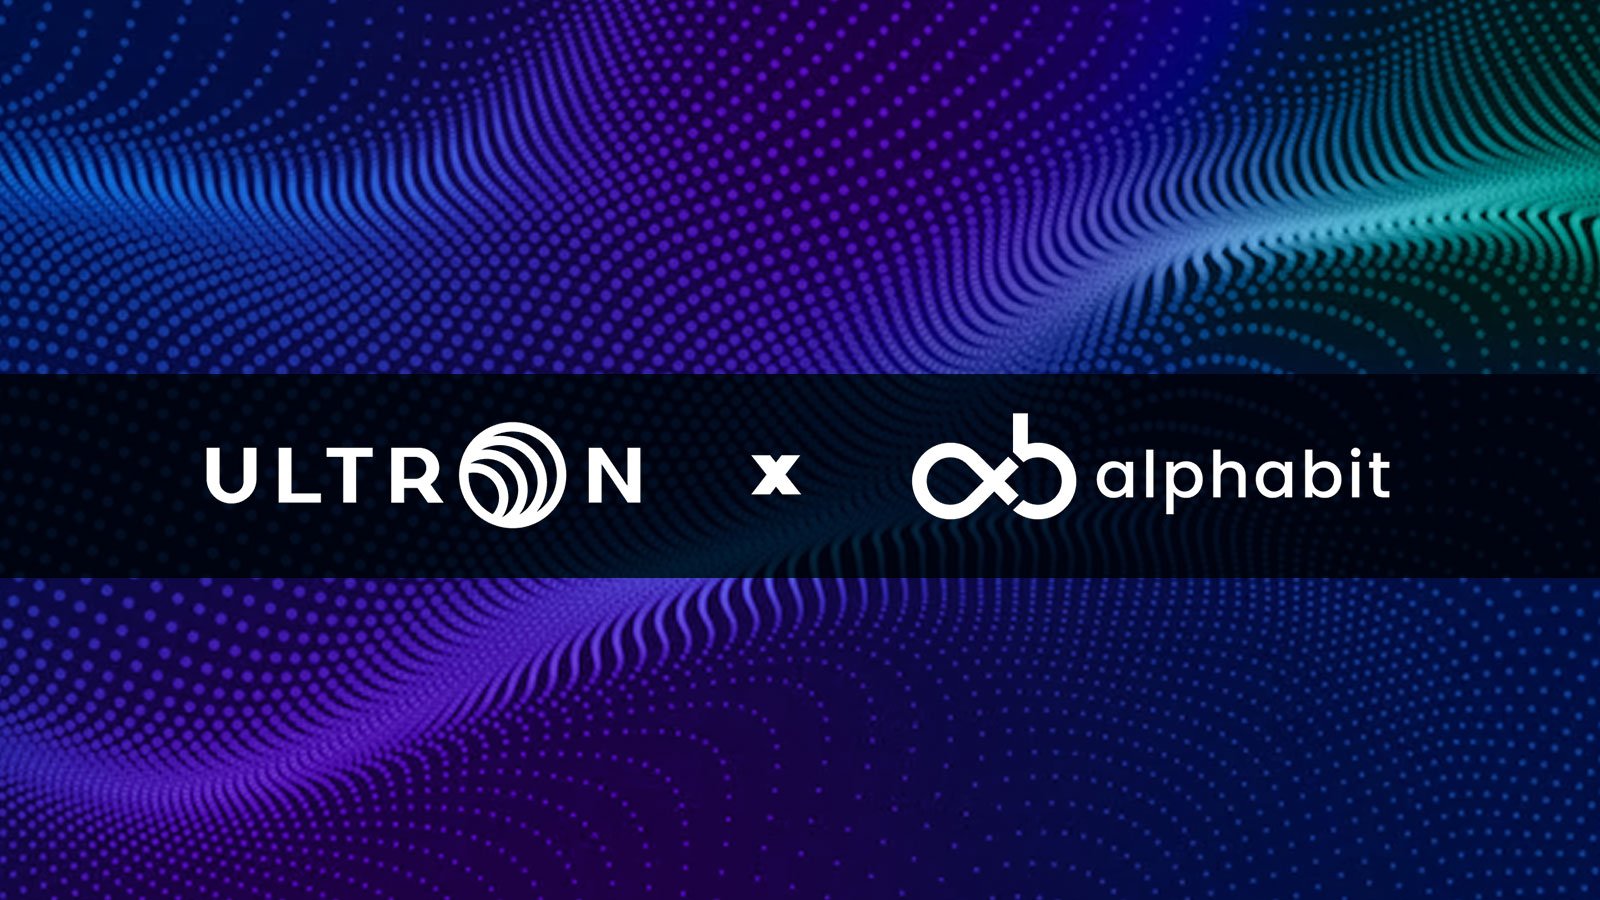 Ultron Foundation Partners with Alphabit Fund, More Announcements Expected